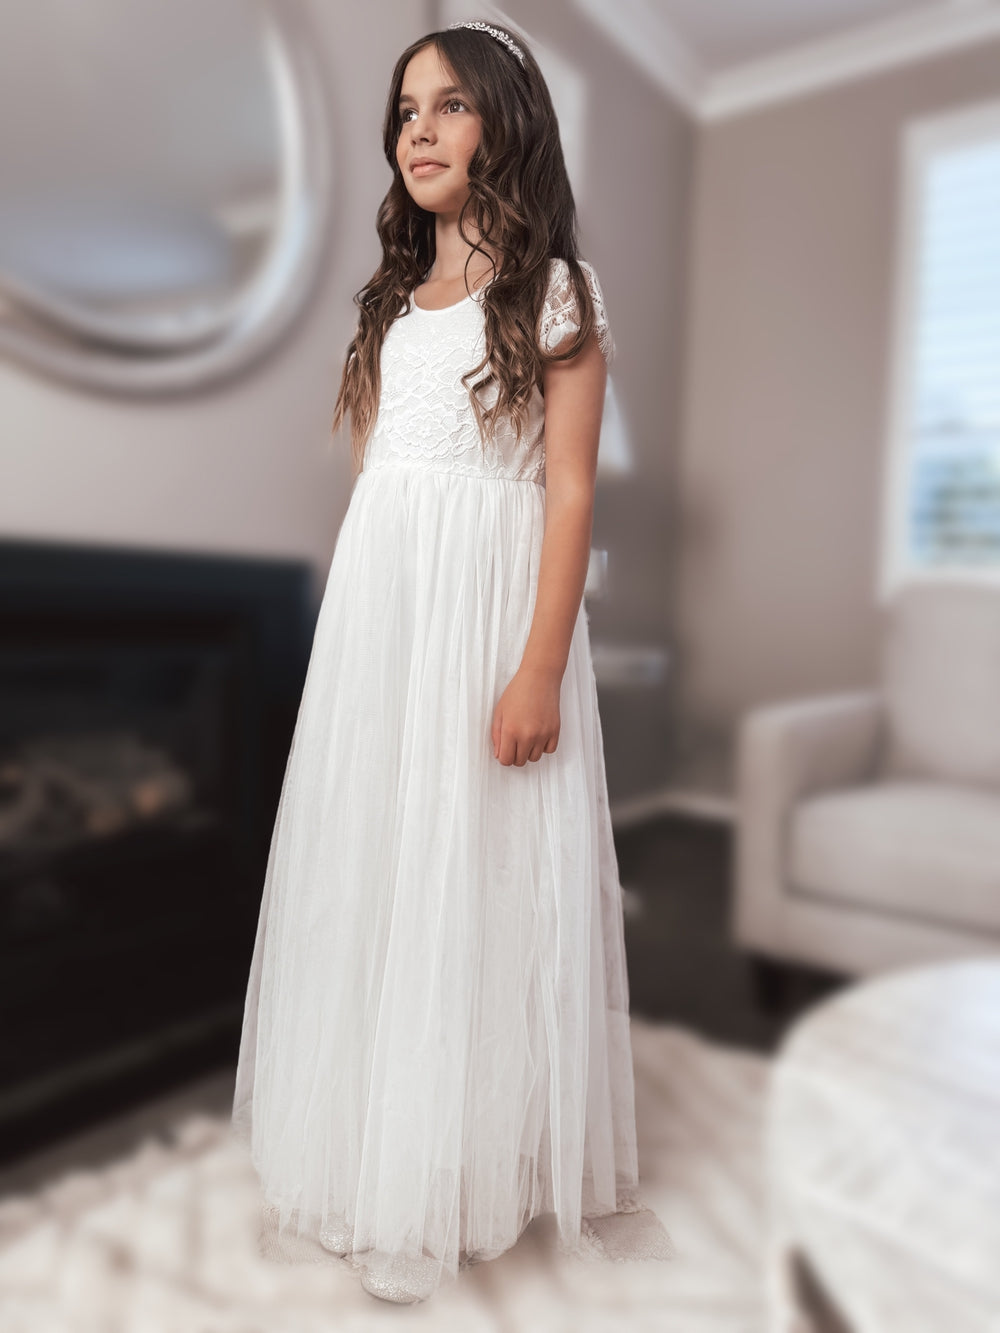 Celeste Girls White Lace & Tulle Dress - All ProductsWhite first communion dress - full length dress